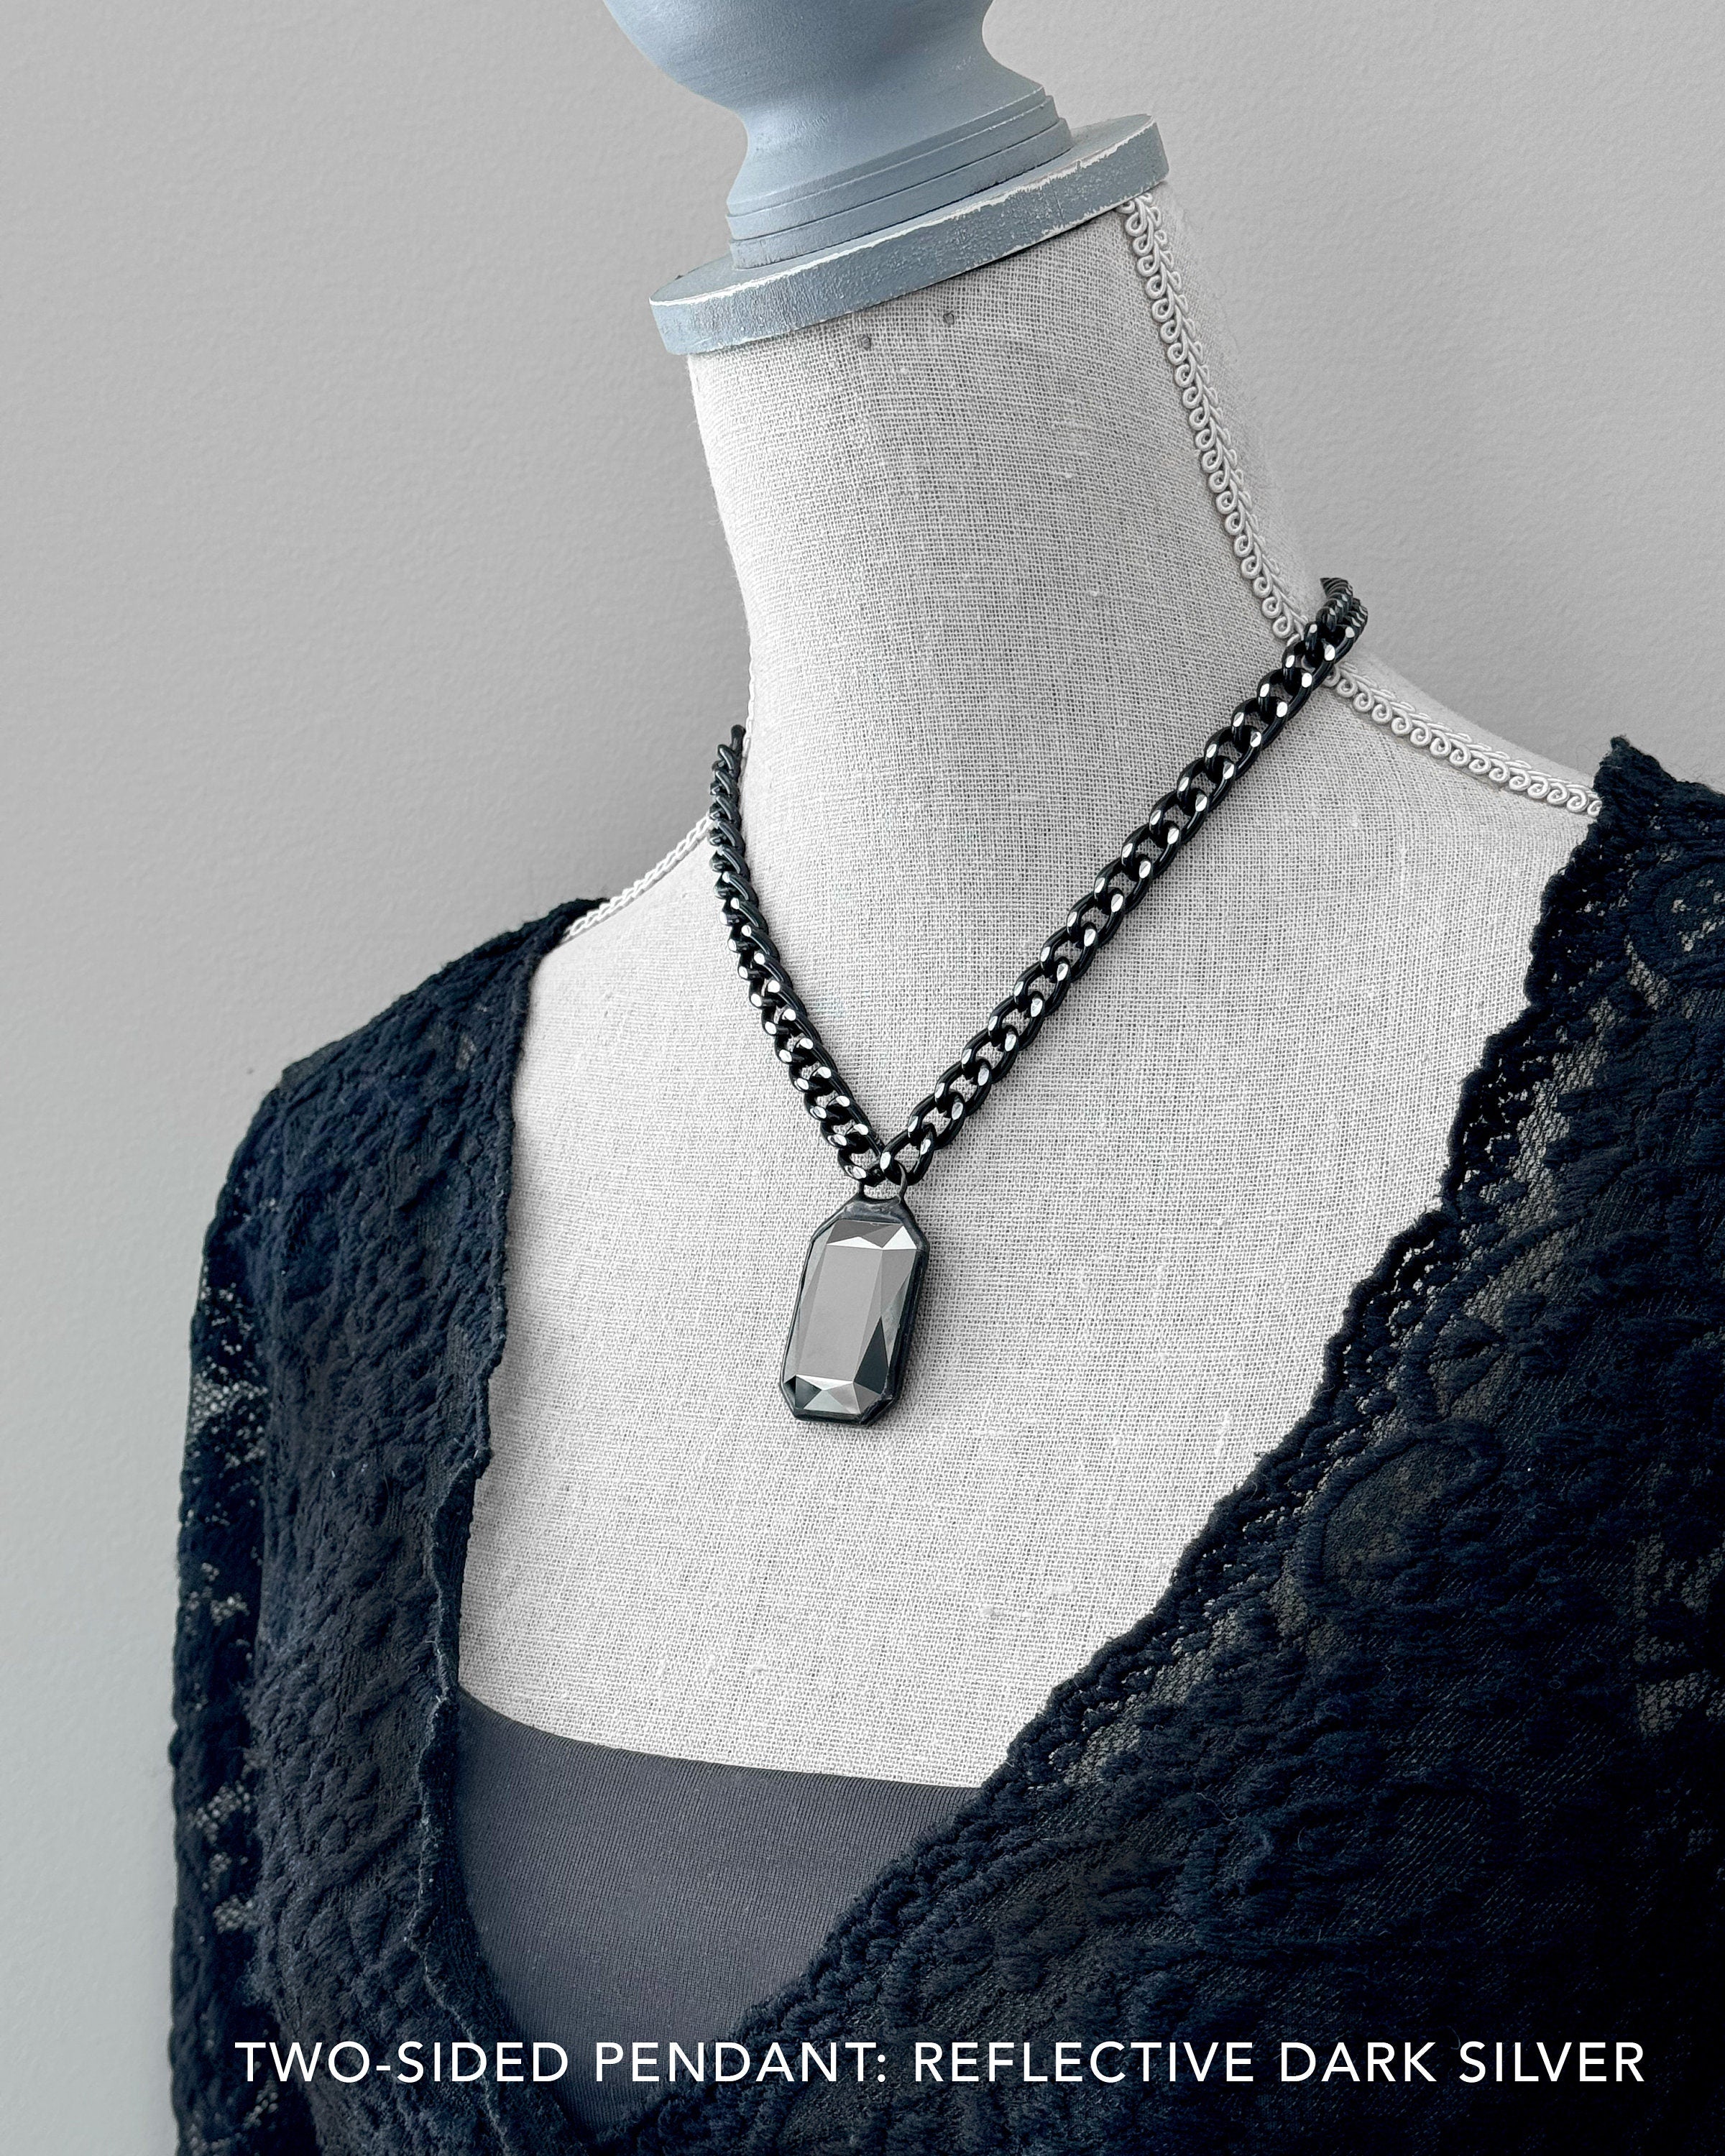 CARBON - Large Crystal Statement Necklace - Two-Sided Metallic Dark Silver + Black Crystal Pendant, Thick Silver Black Chain, Modern Jewelry